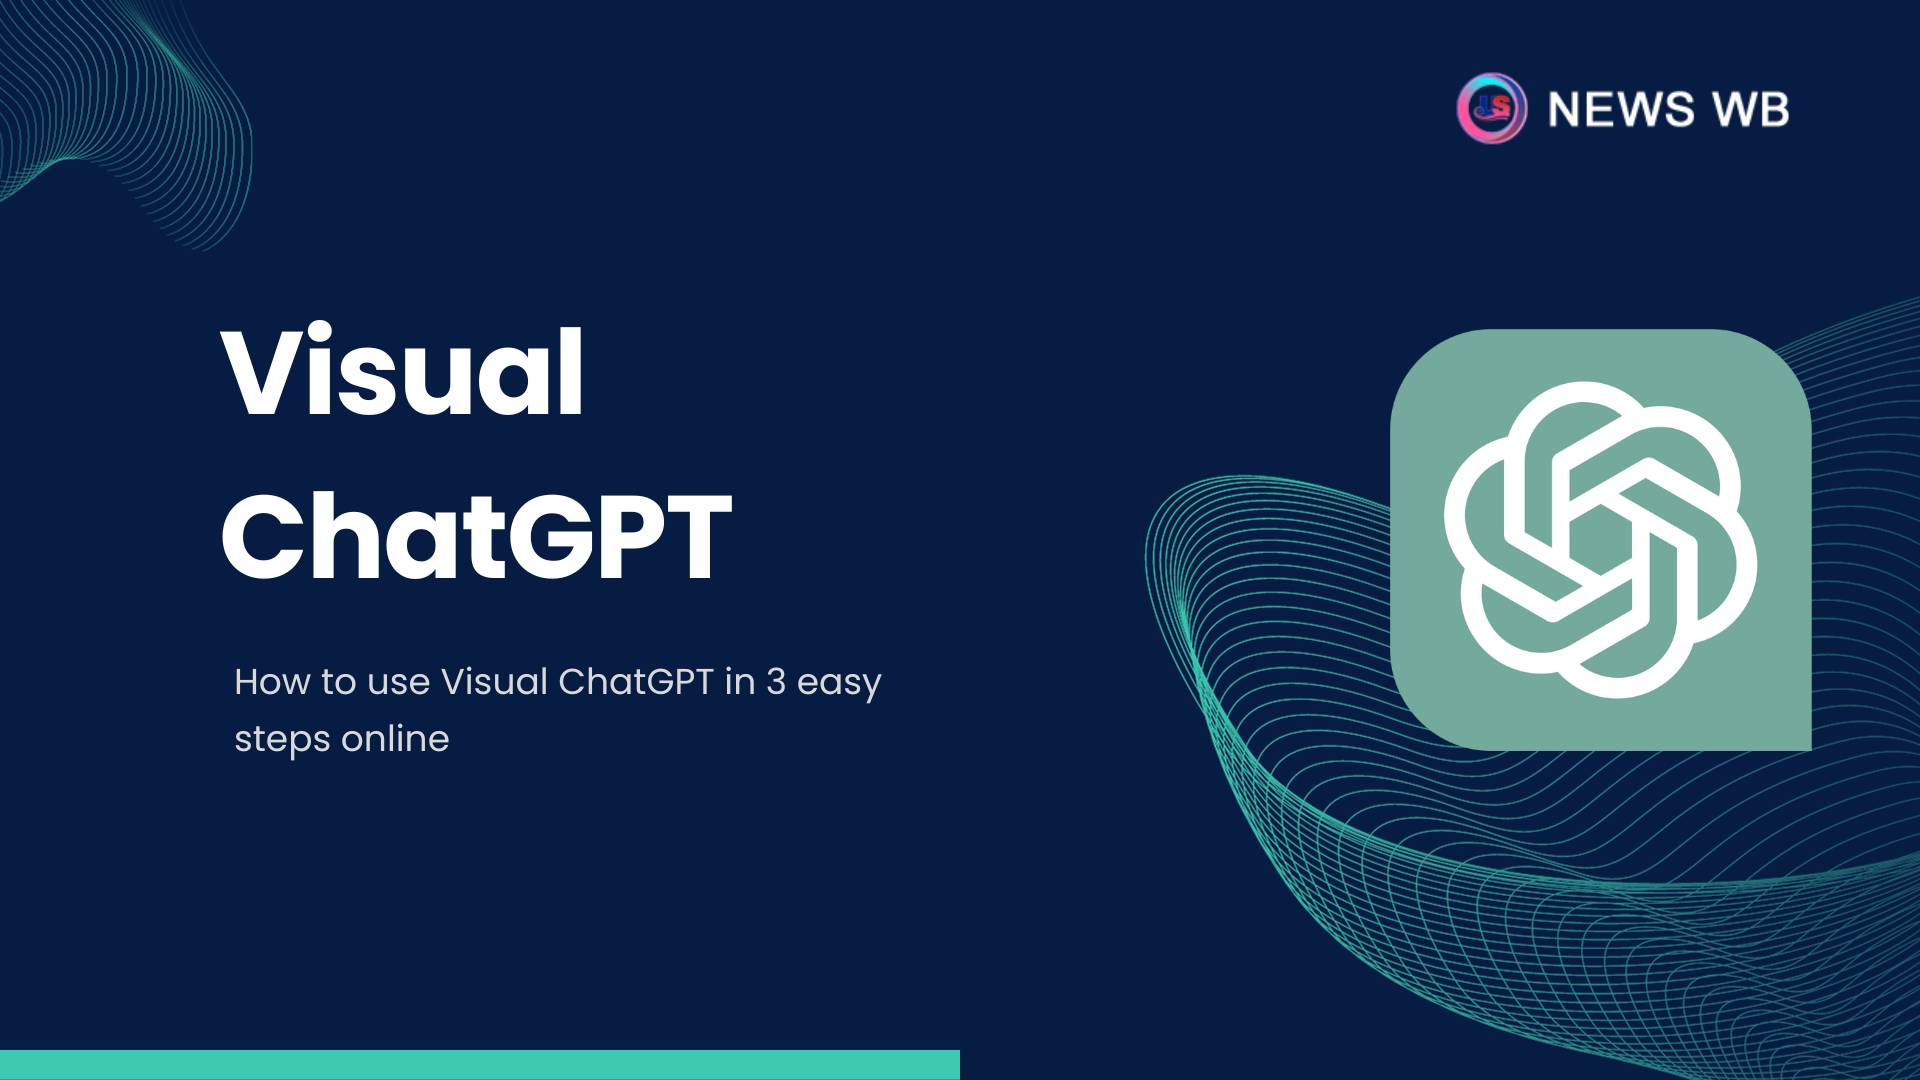 How to use visual ChatGPT in 3 easy steps online